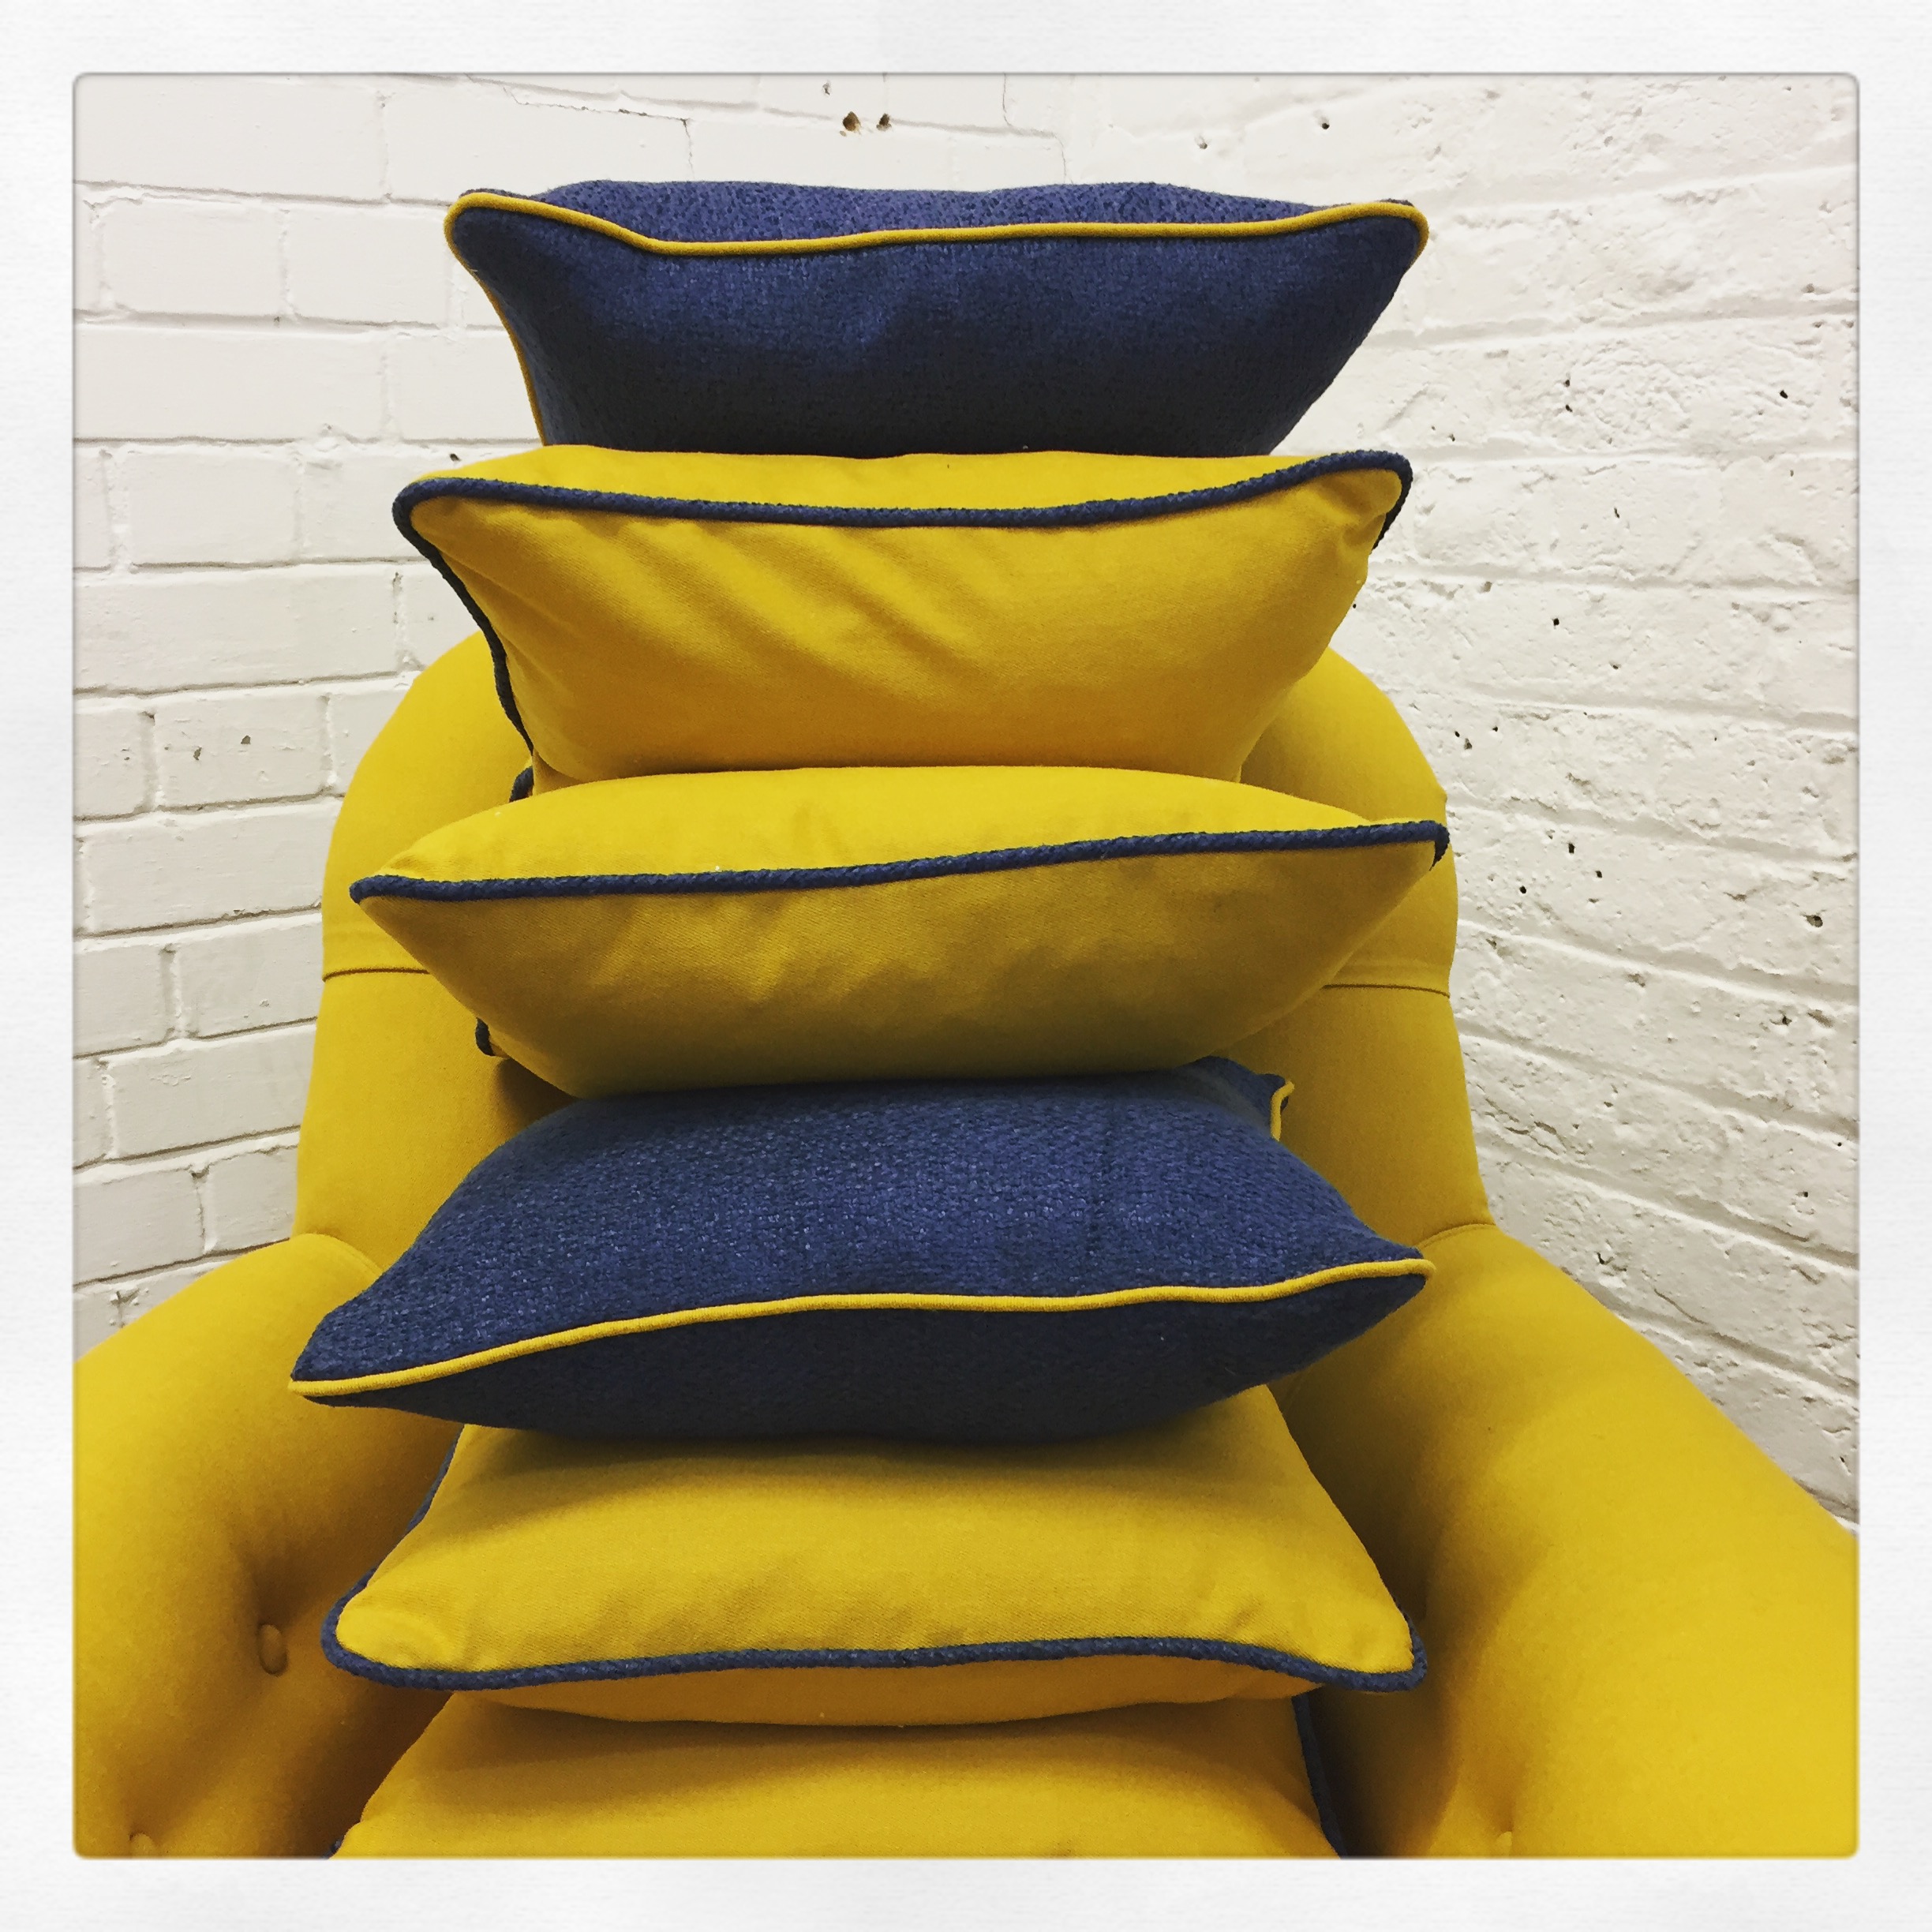 Bespoke Soft Furnishings in Yellow and Blue Scatter